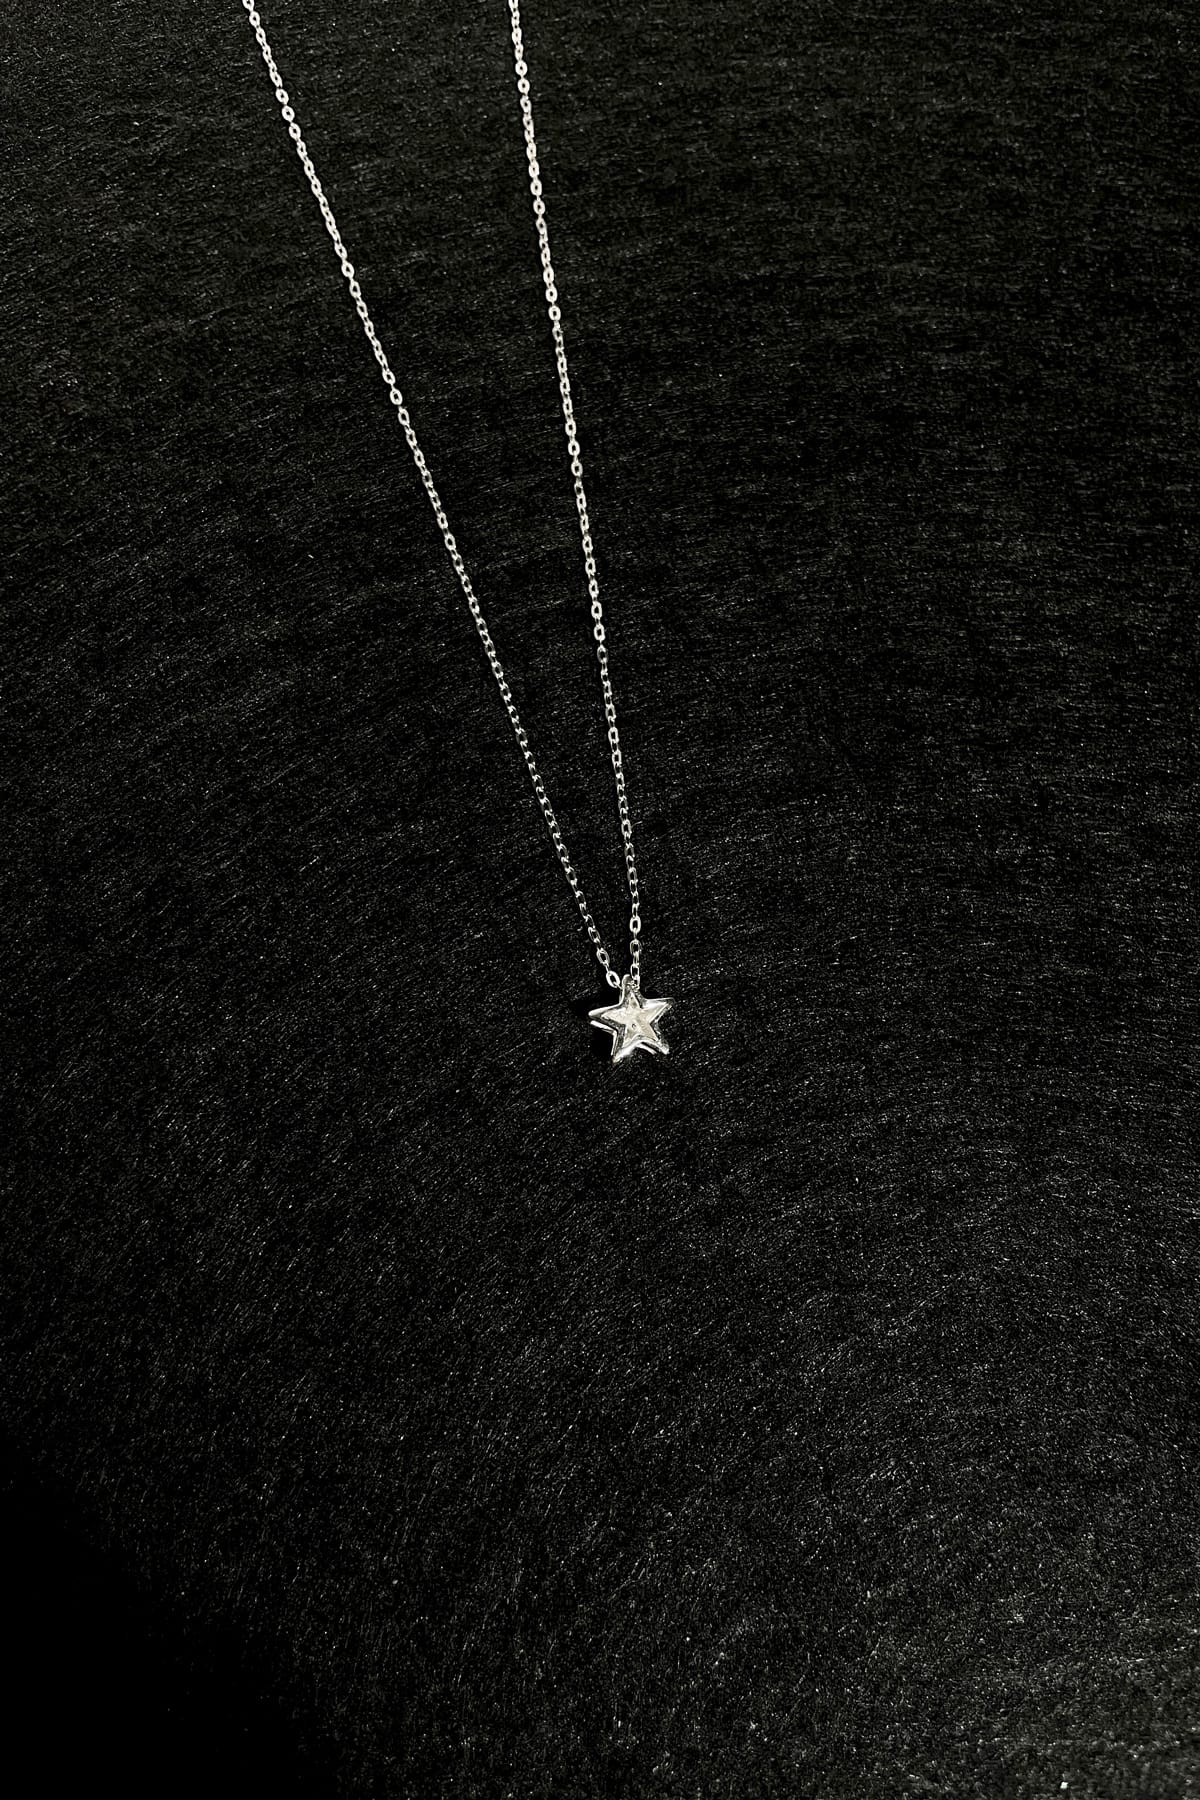 Sterling Silver Star Pendant with 40cm Chain Plus 5cm Extender available at LeGassick Diamonds and Jewellery Gold Coast, Australia.